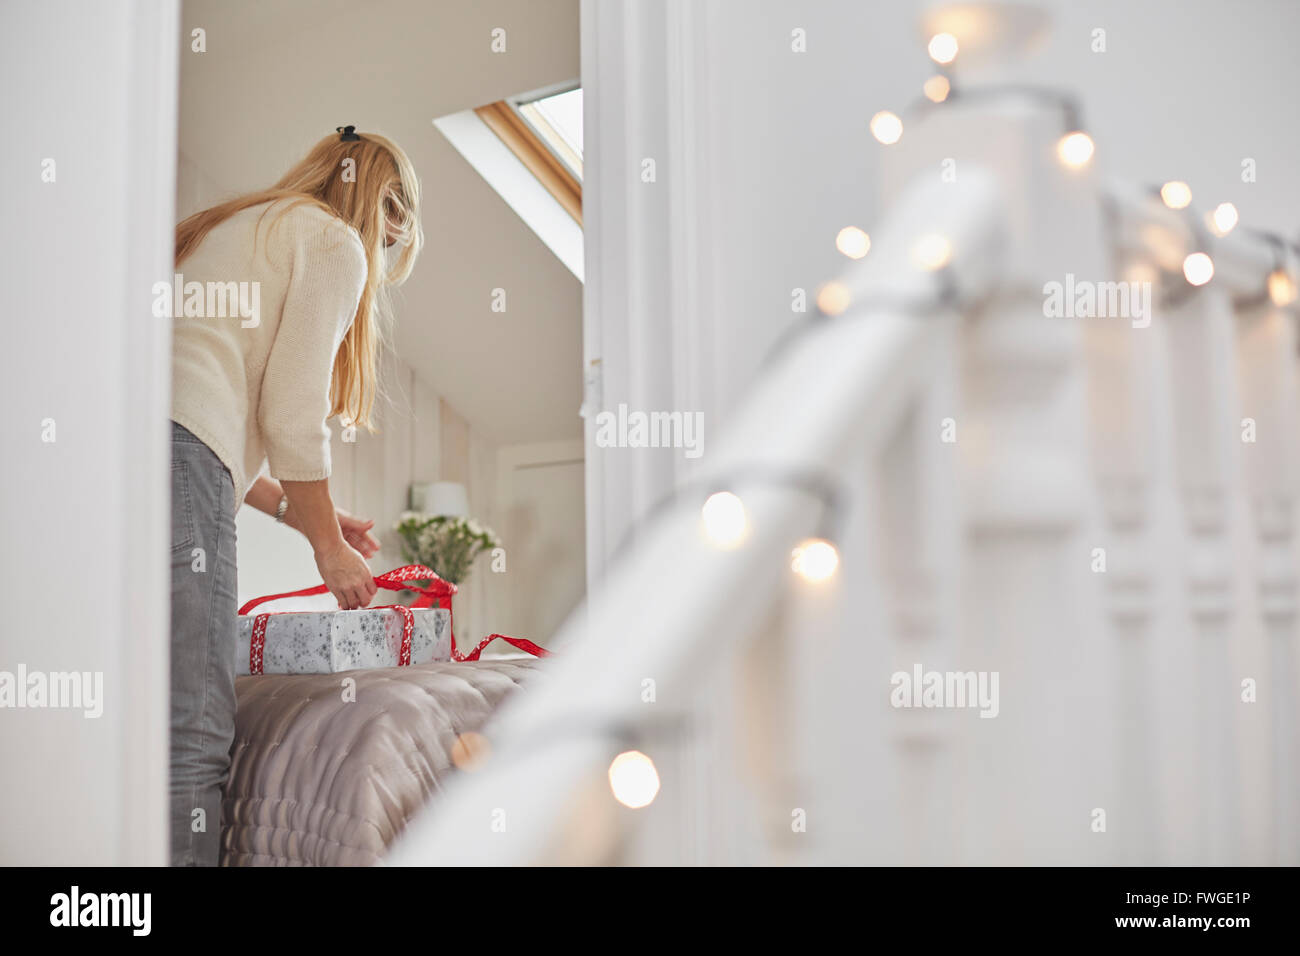 A woman wrapping red ribbons around Christmas presents on a bed, view through the bedroom door. Stock Photo